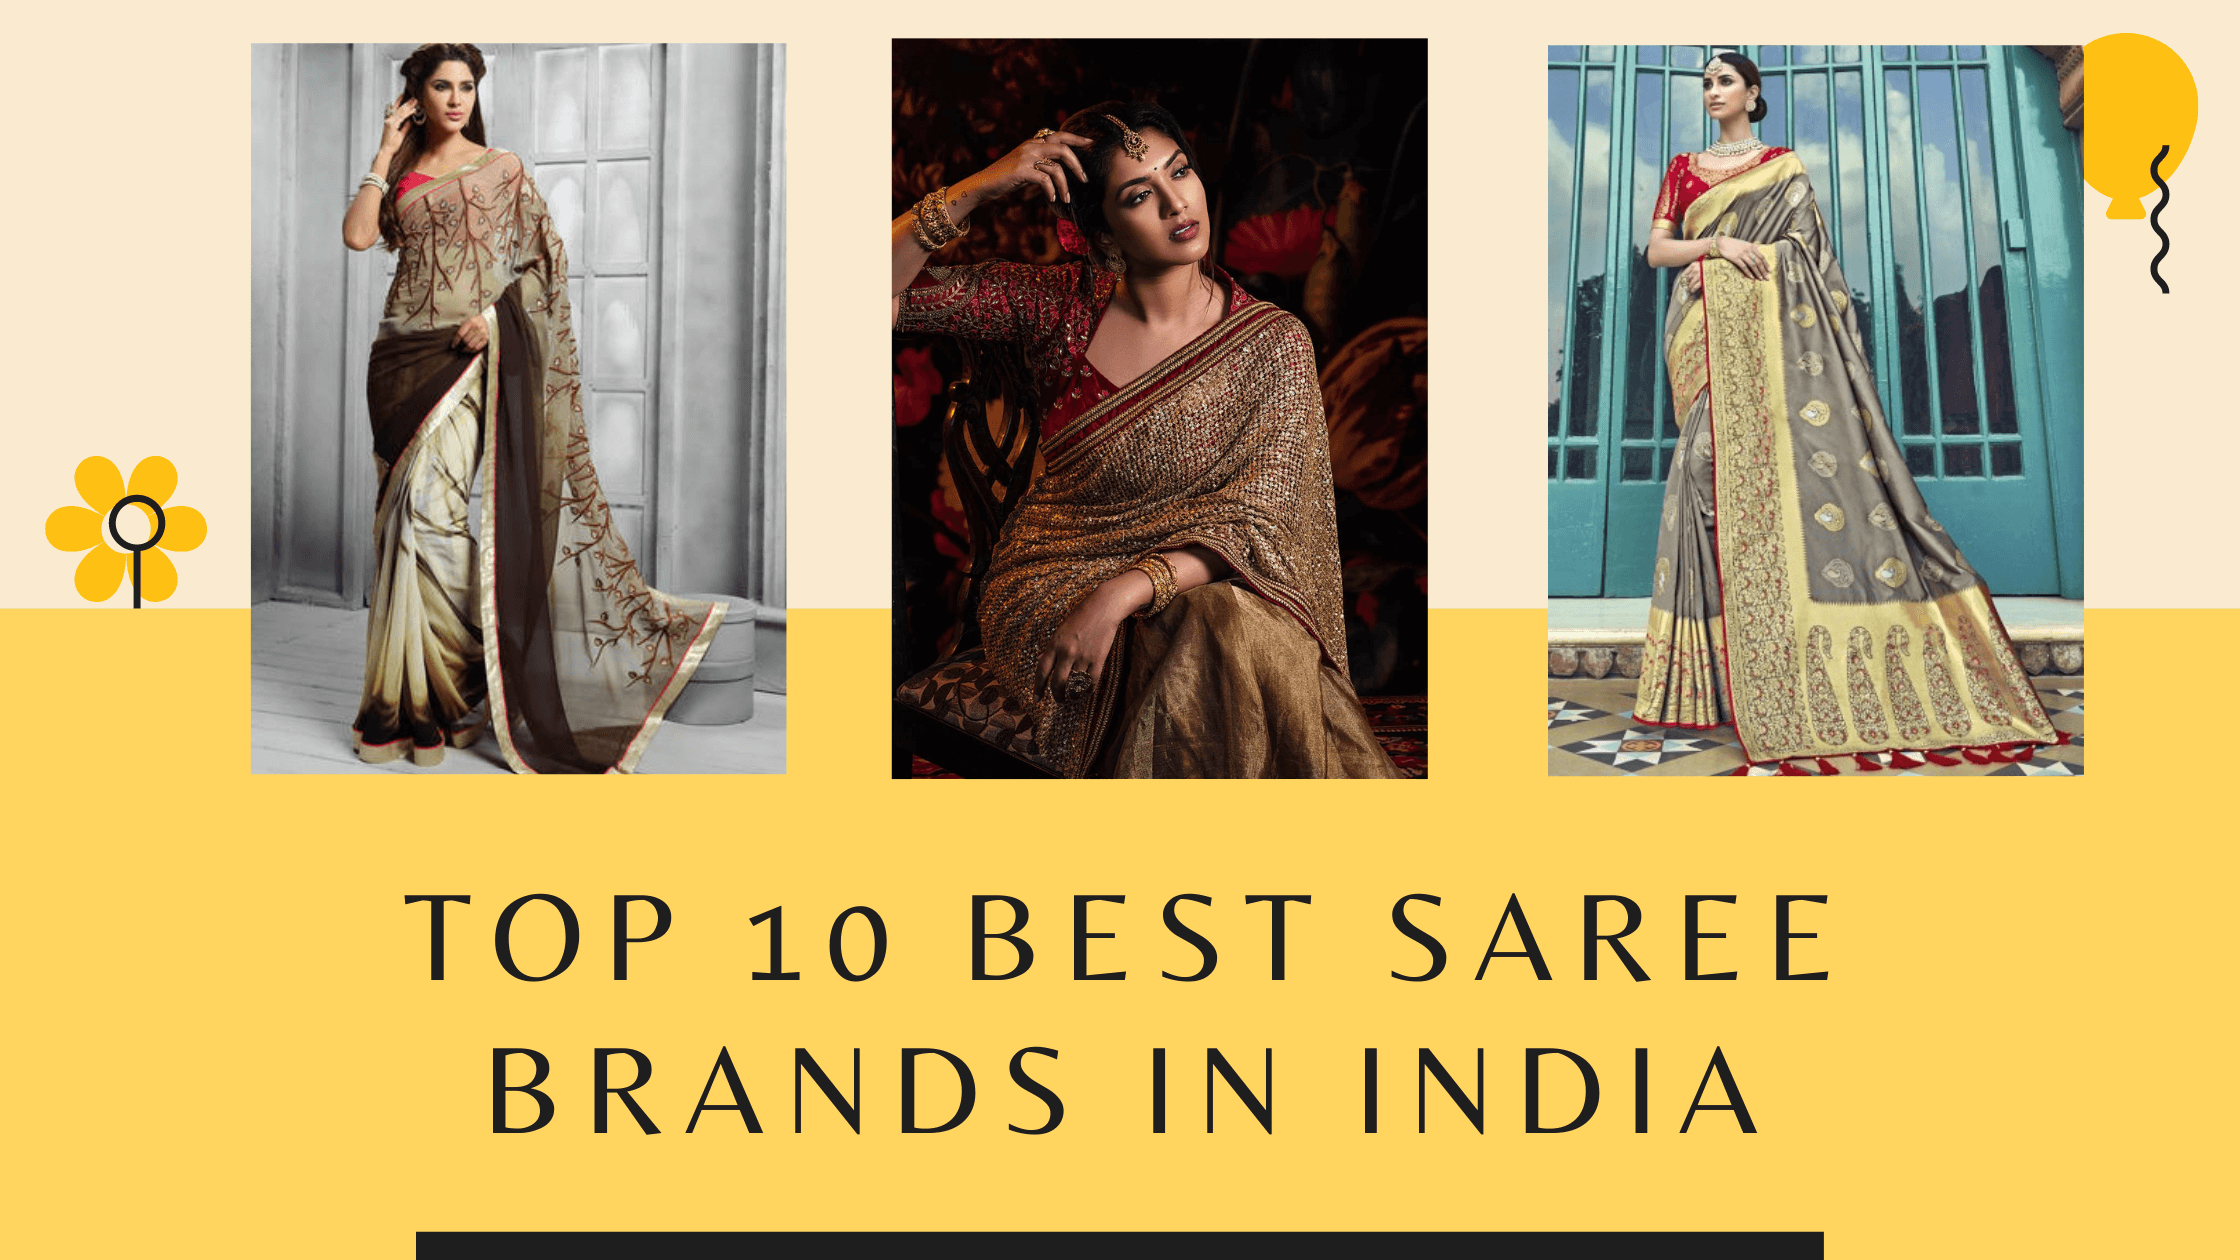 Top 10 Best Saree Brands in India – Most Famous